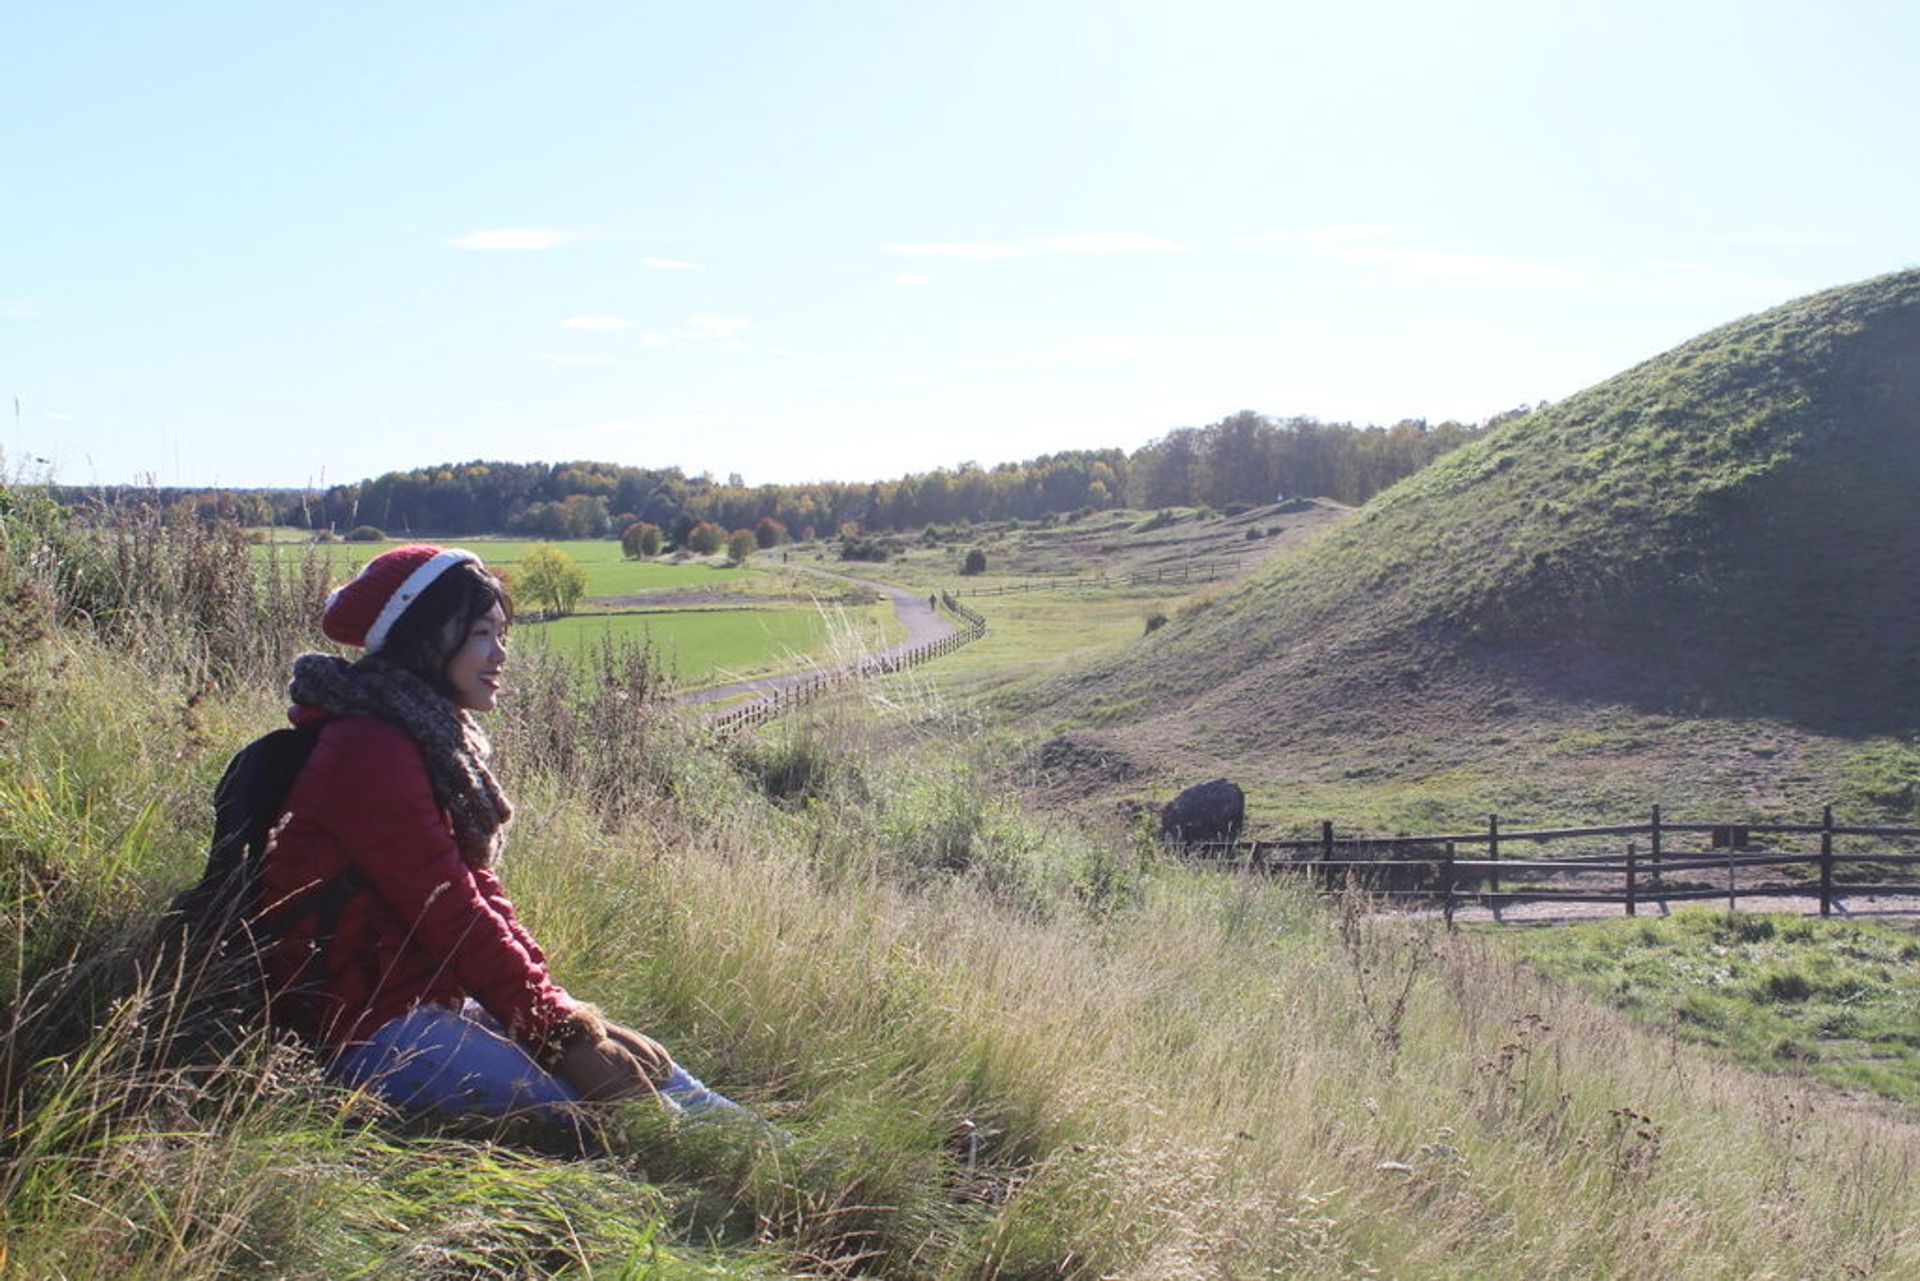 A woman sitting on a hill full of long grease. In the background, it is another hill and a wooden railing.